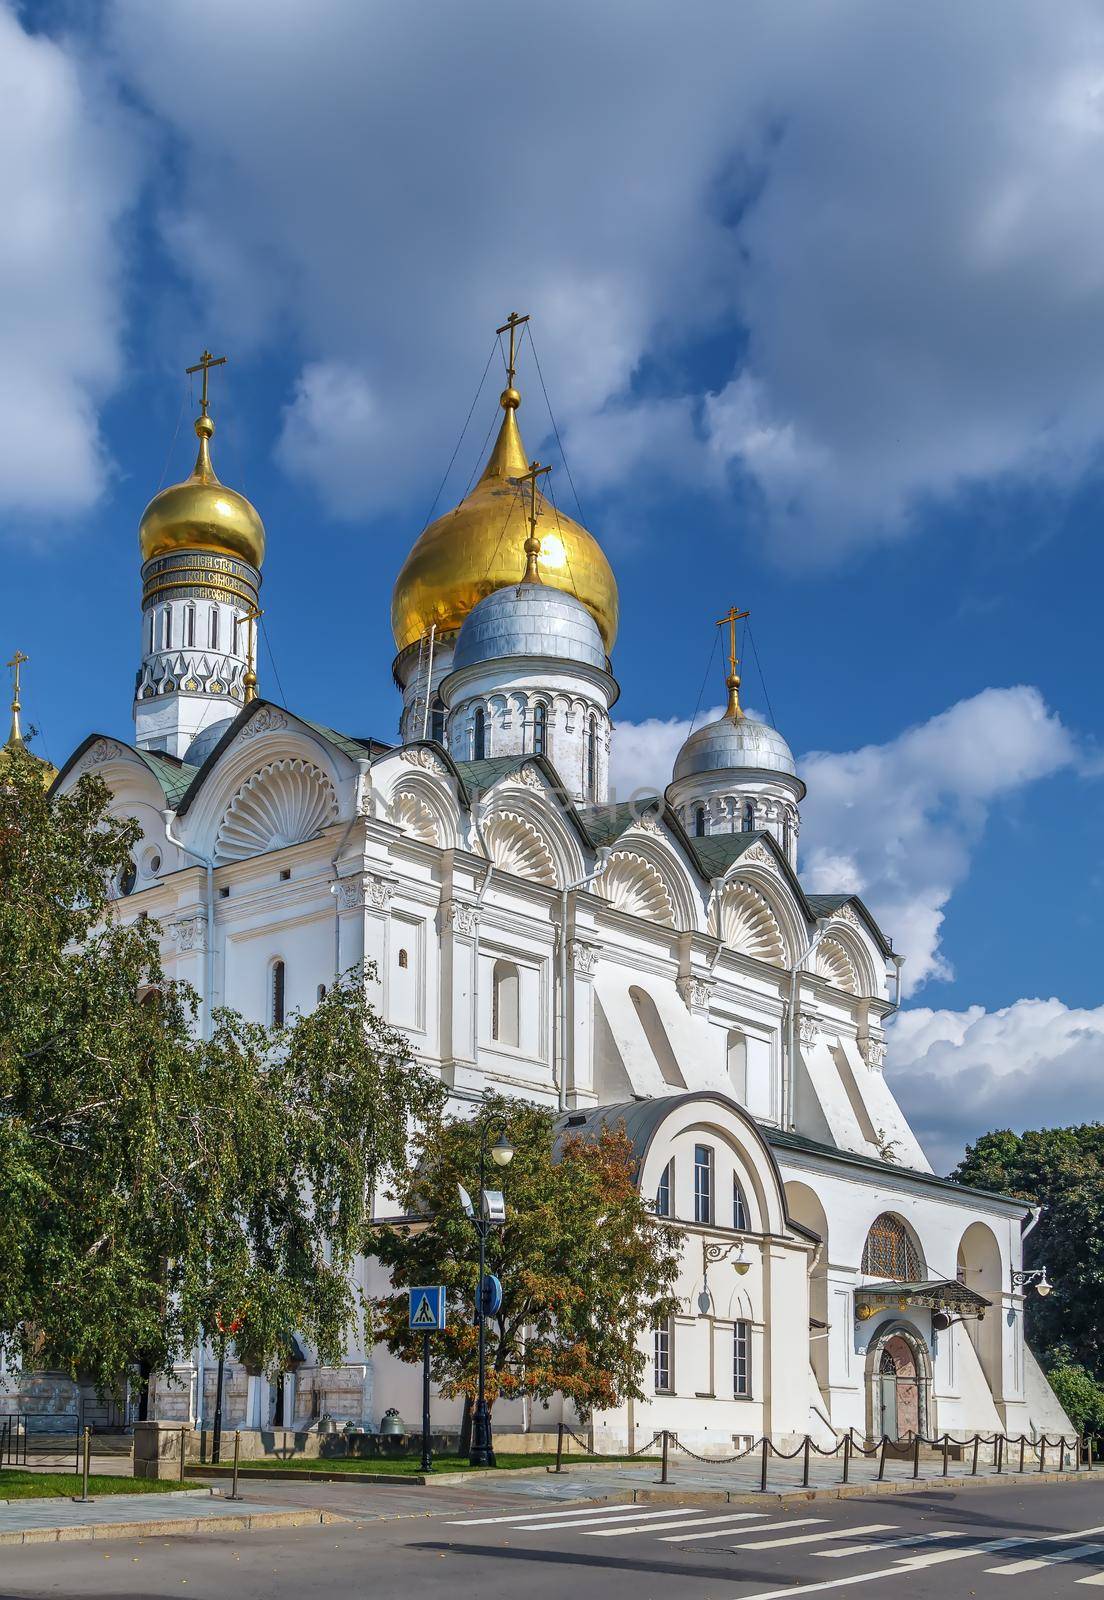 Cathedral of the Archange is a Russian Orthodox church dedicated to the Archangel Michael. It is located in Cathedral Square of the Moscow Kremlin, Russia